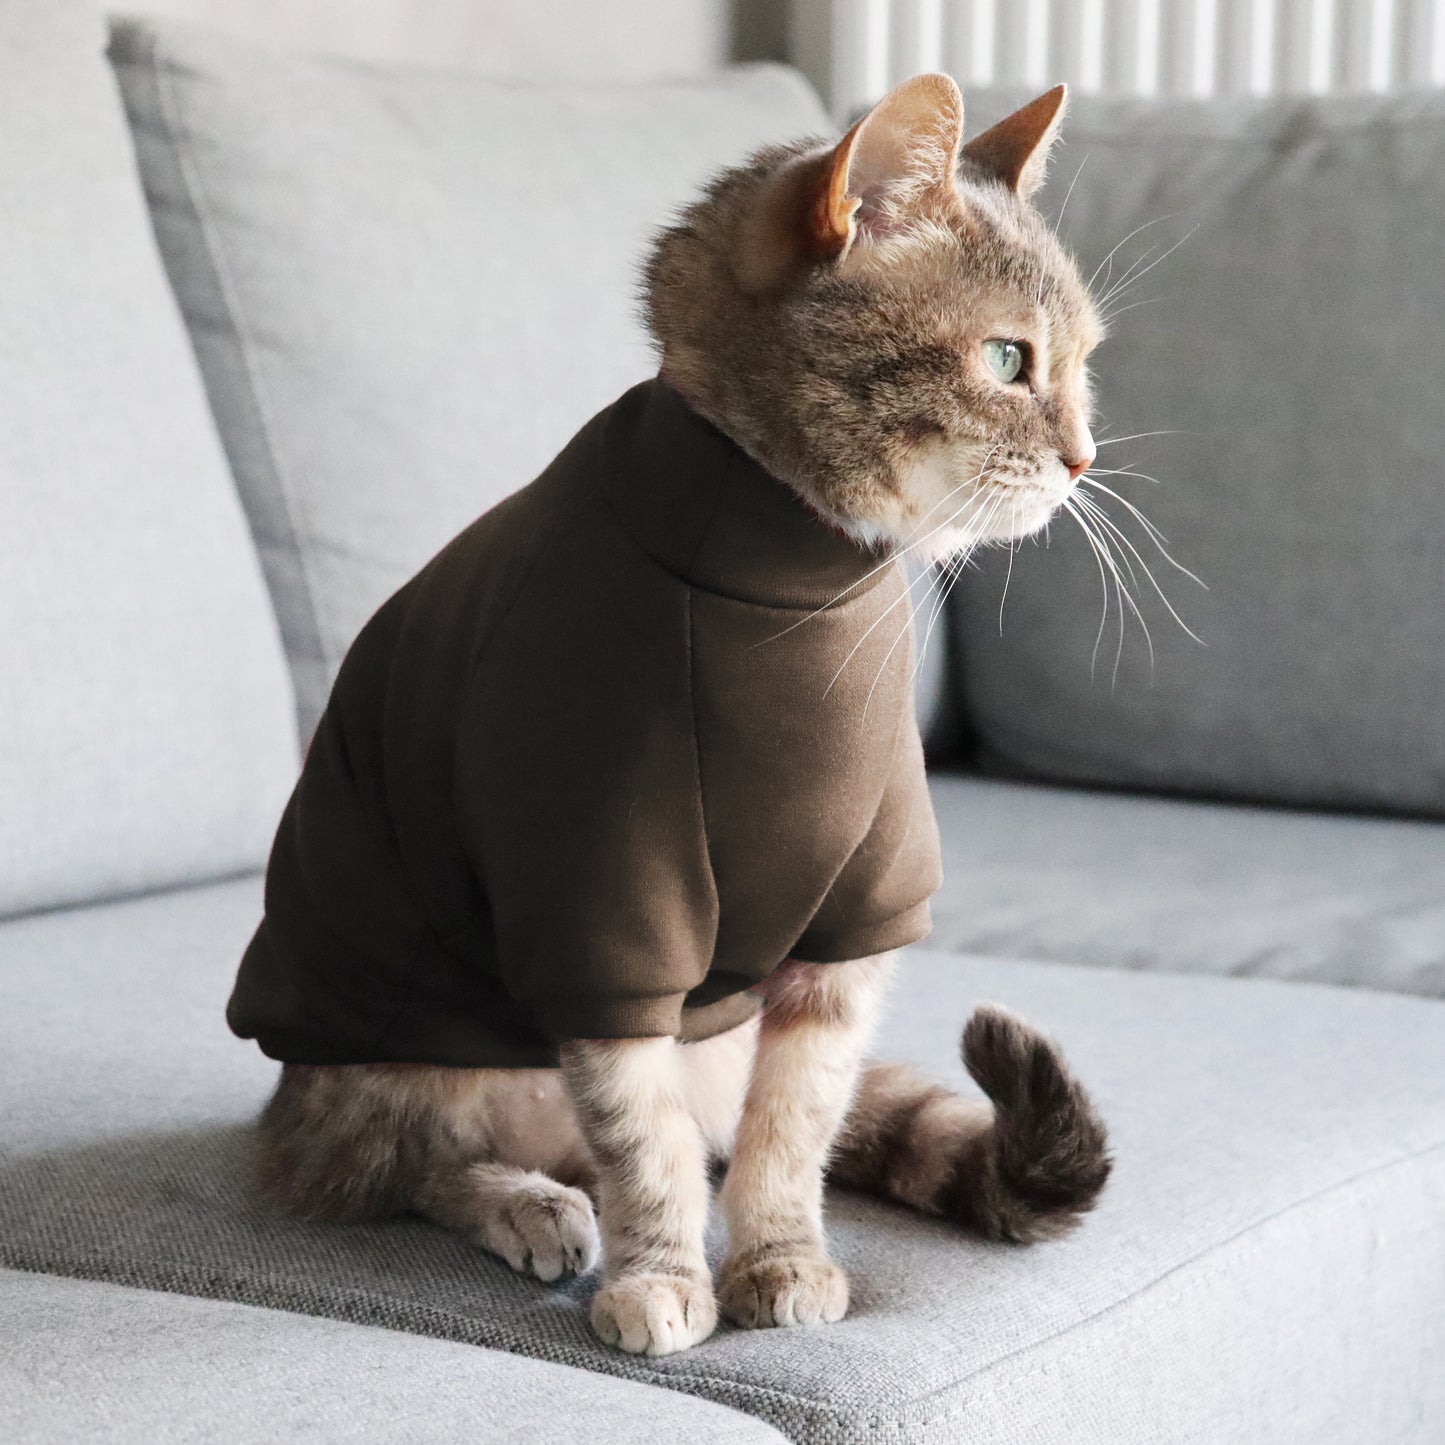 Brown cotton sweater for Cat. Shirt for Sphynx and all cats breeds